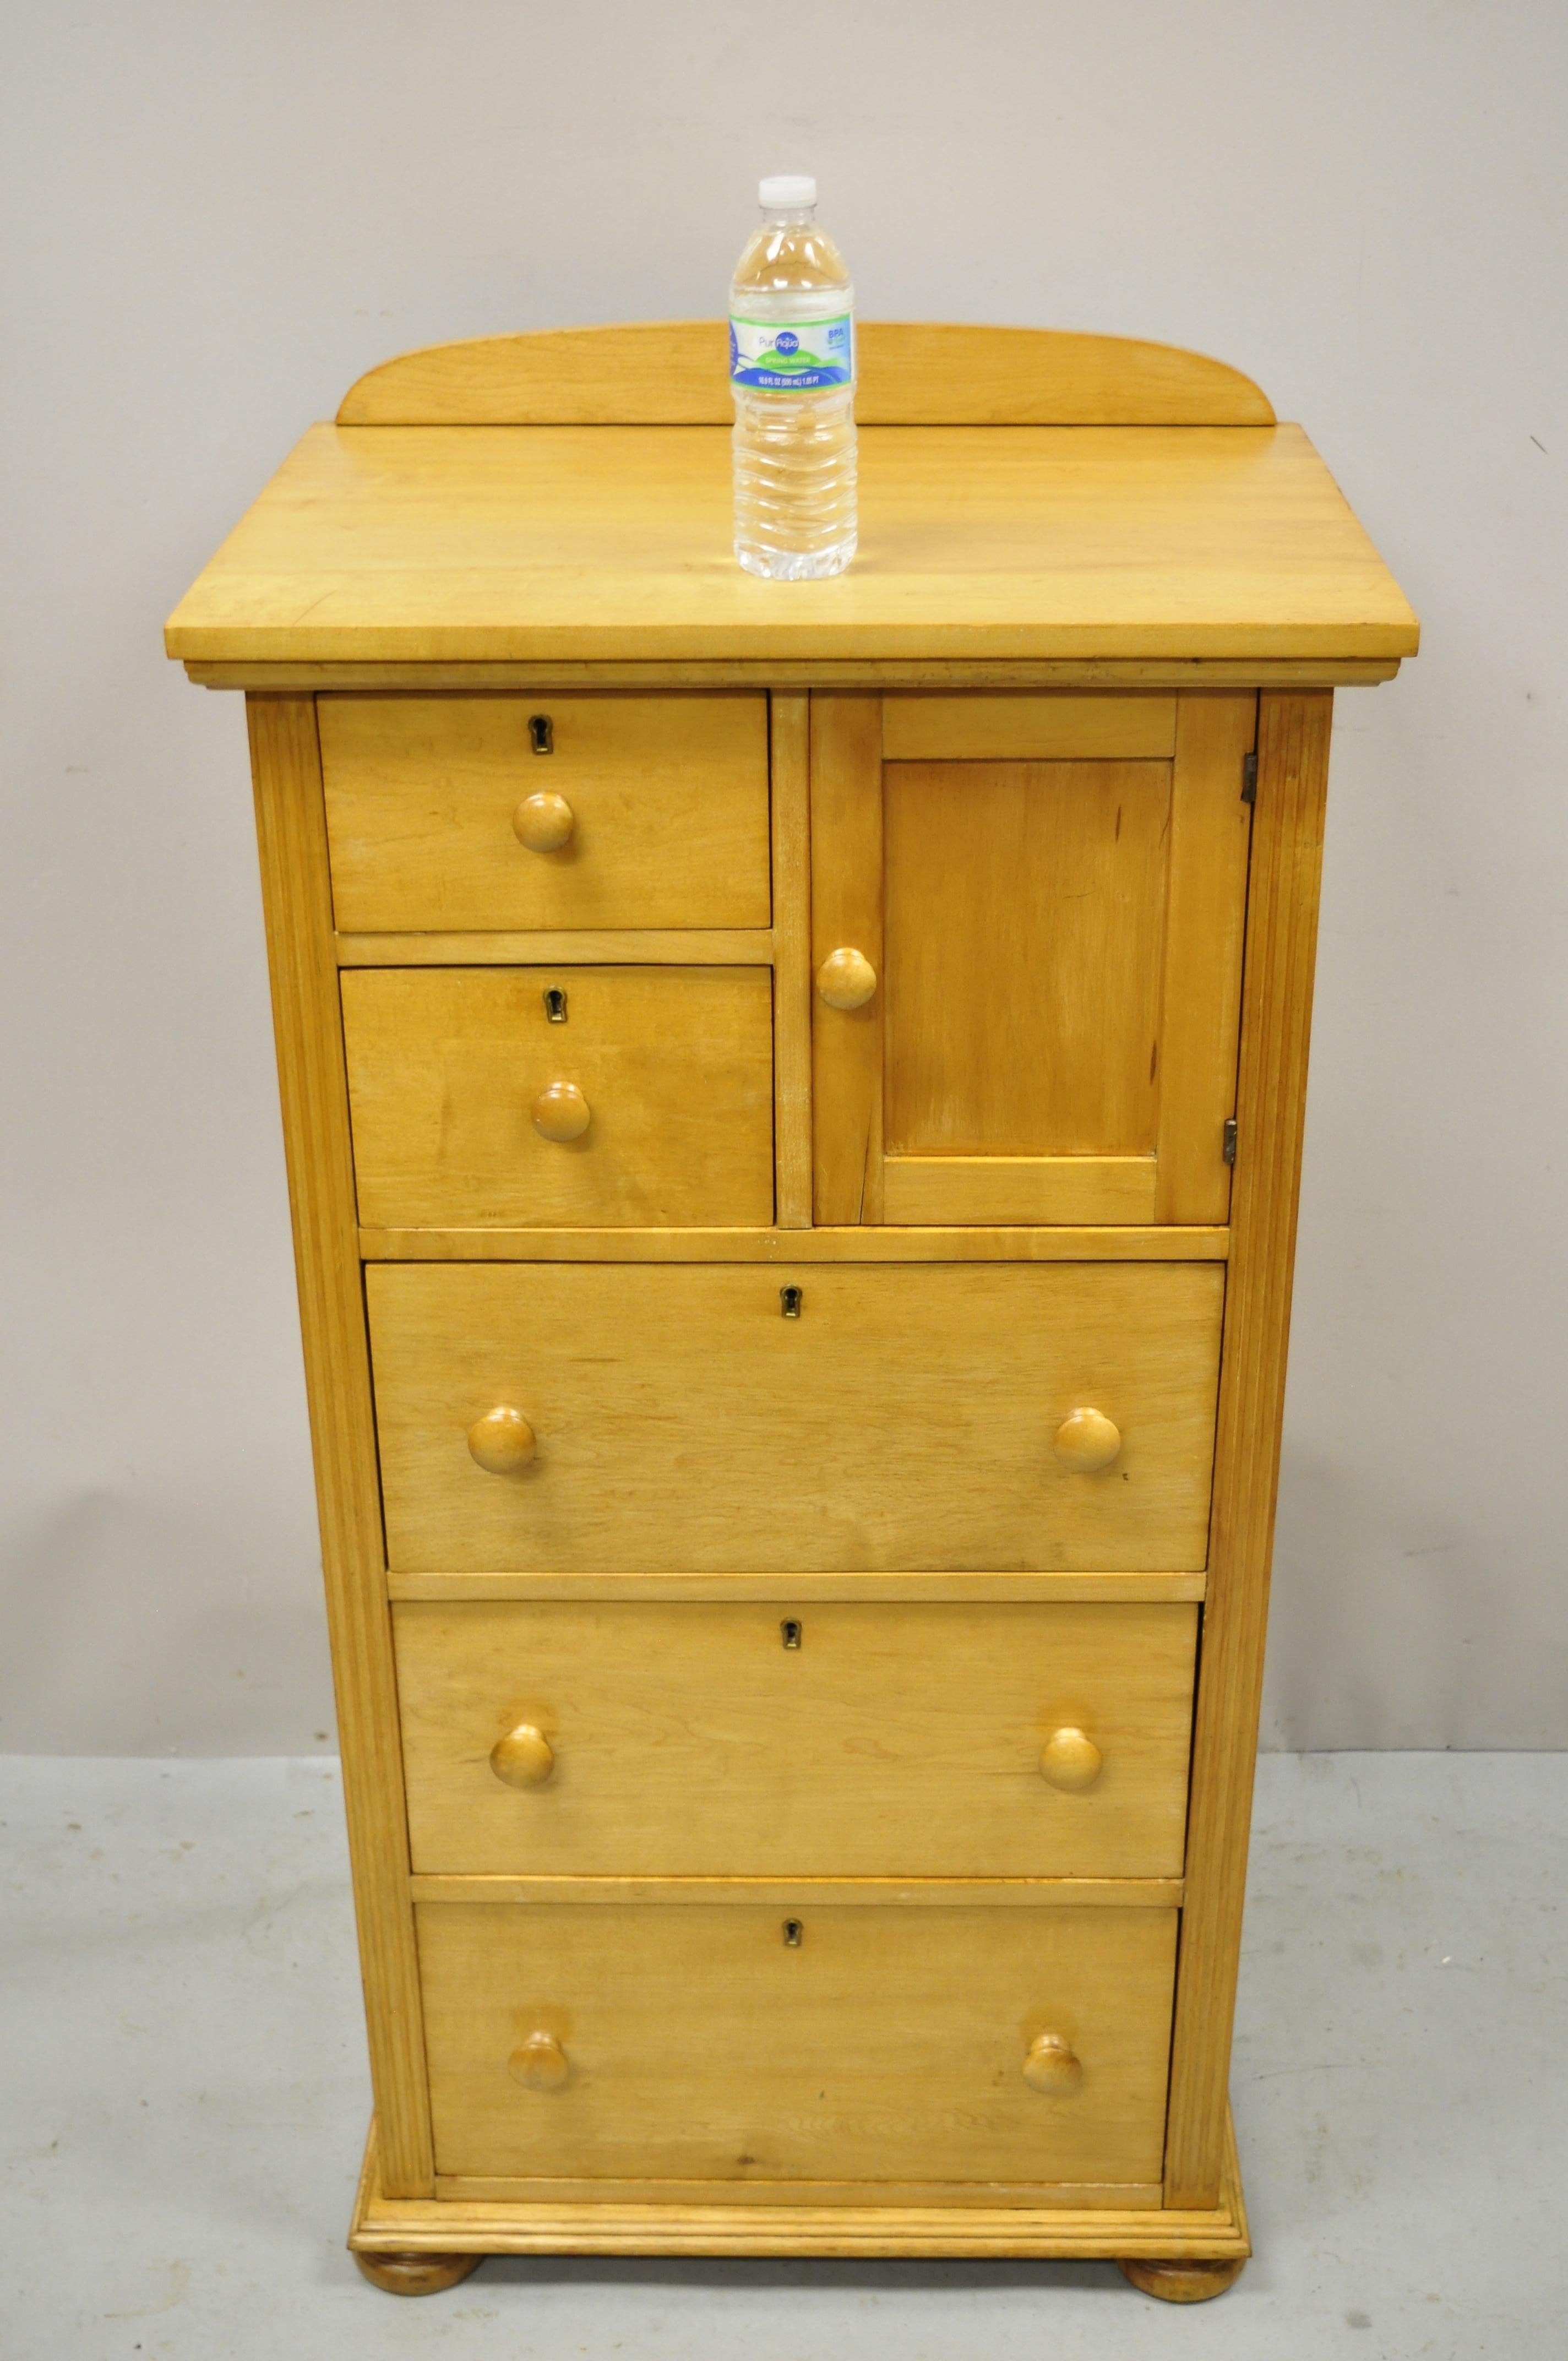 Antique Maple Wood American Empire Tall Chest Washstand Dresser Cabinet For Sale 1